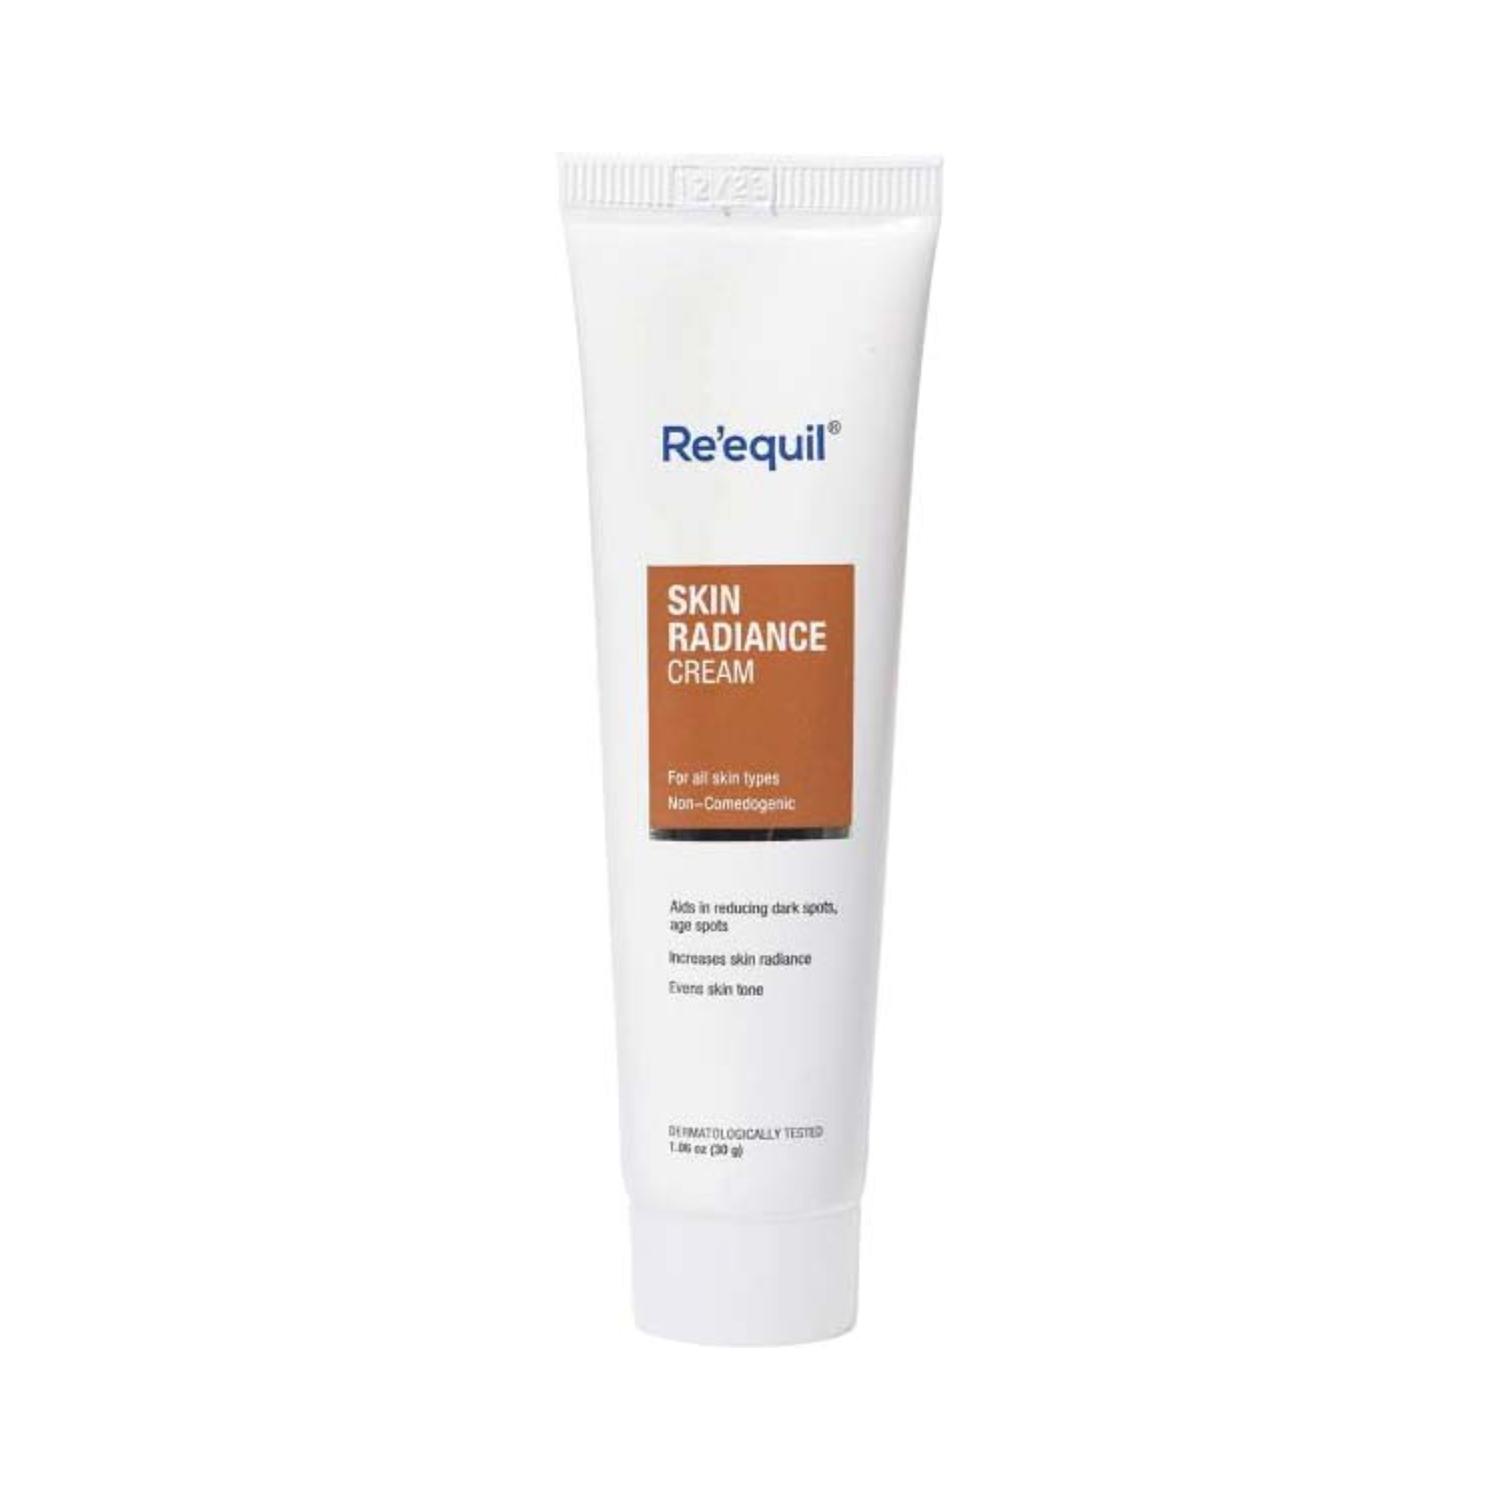 re'equil skin radiance cream (30g)